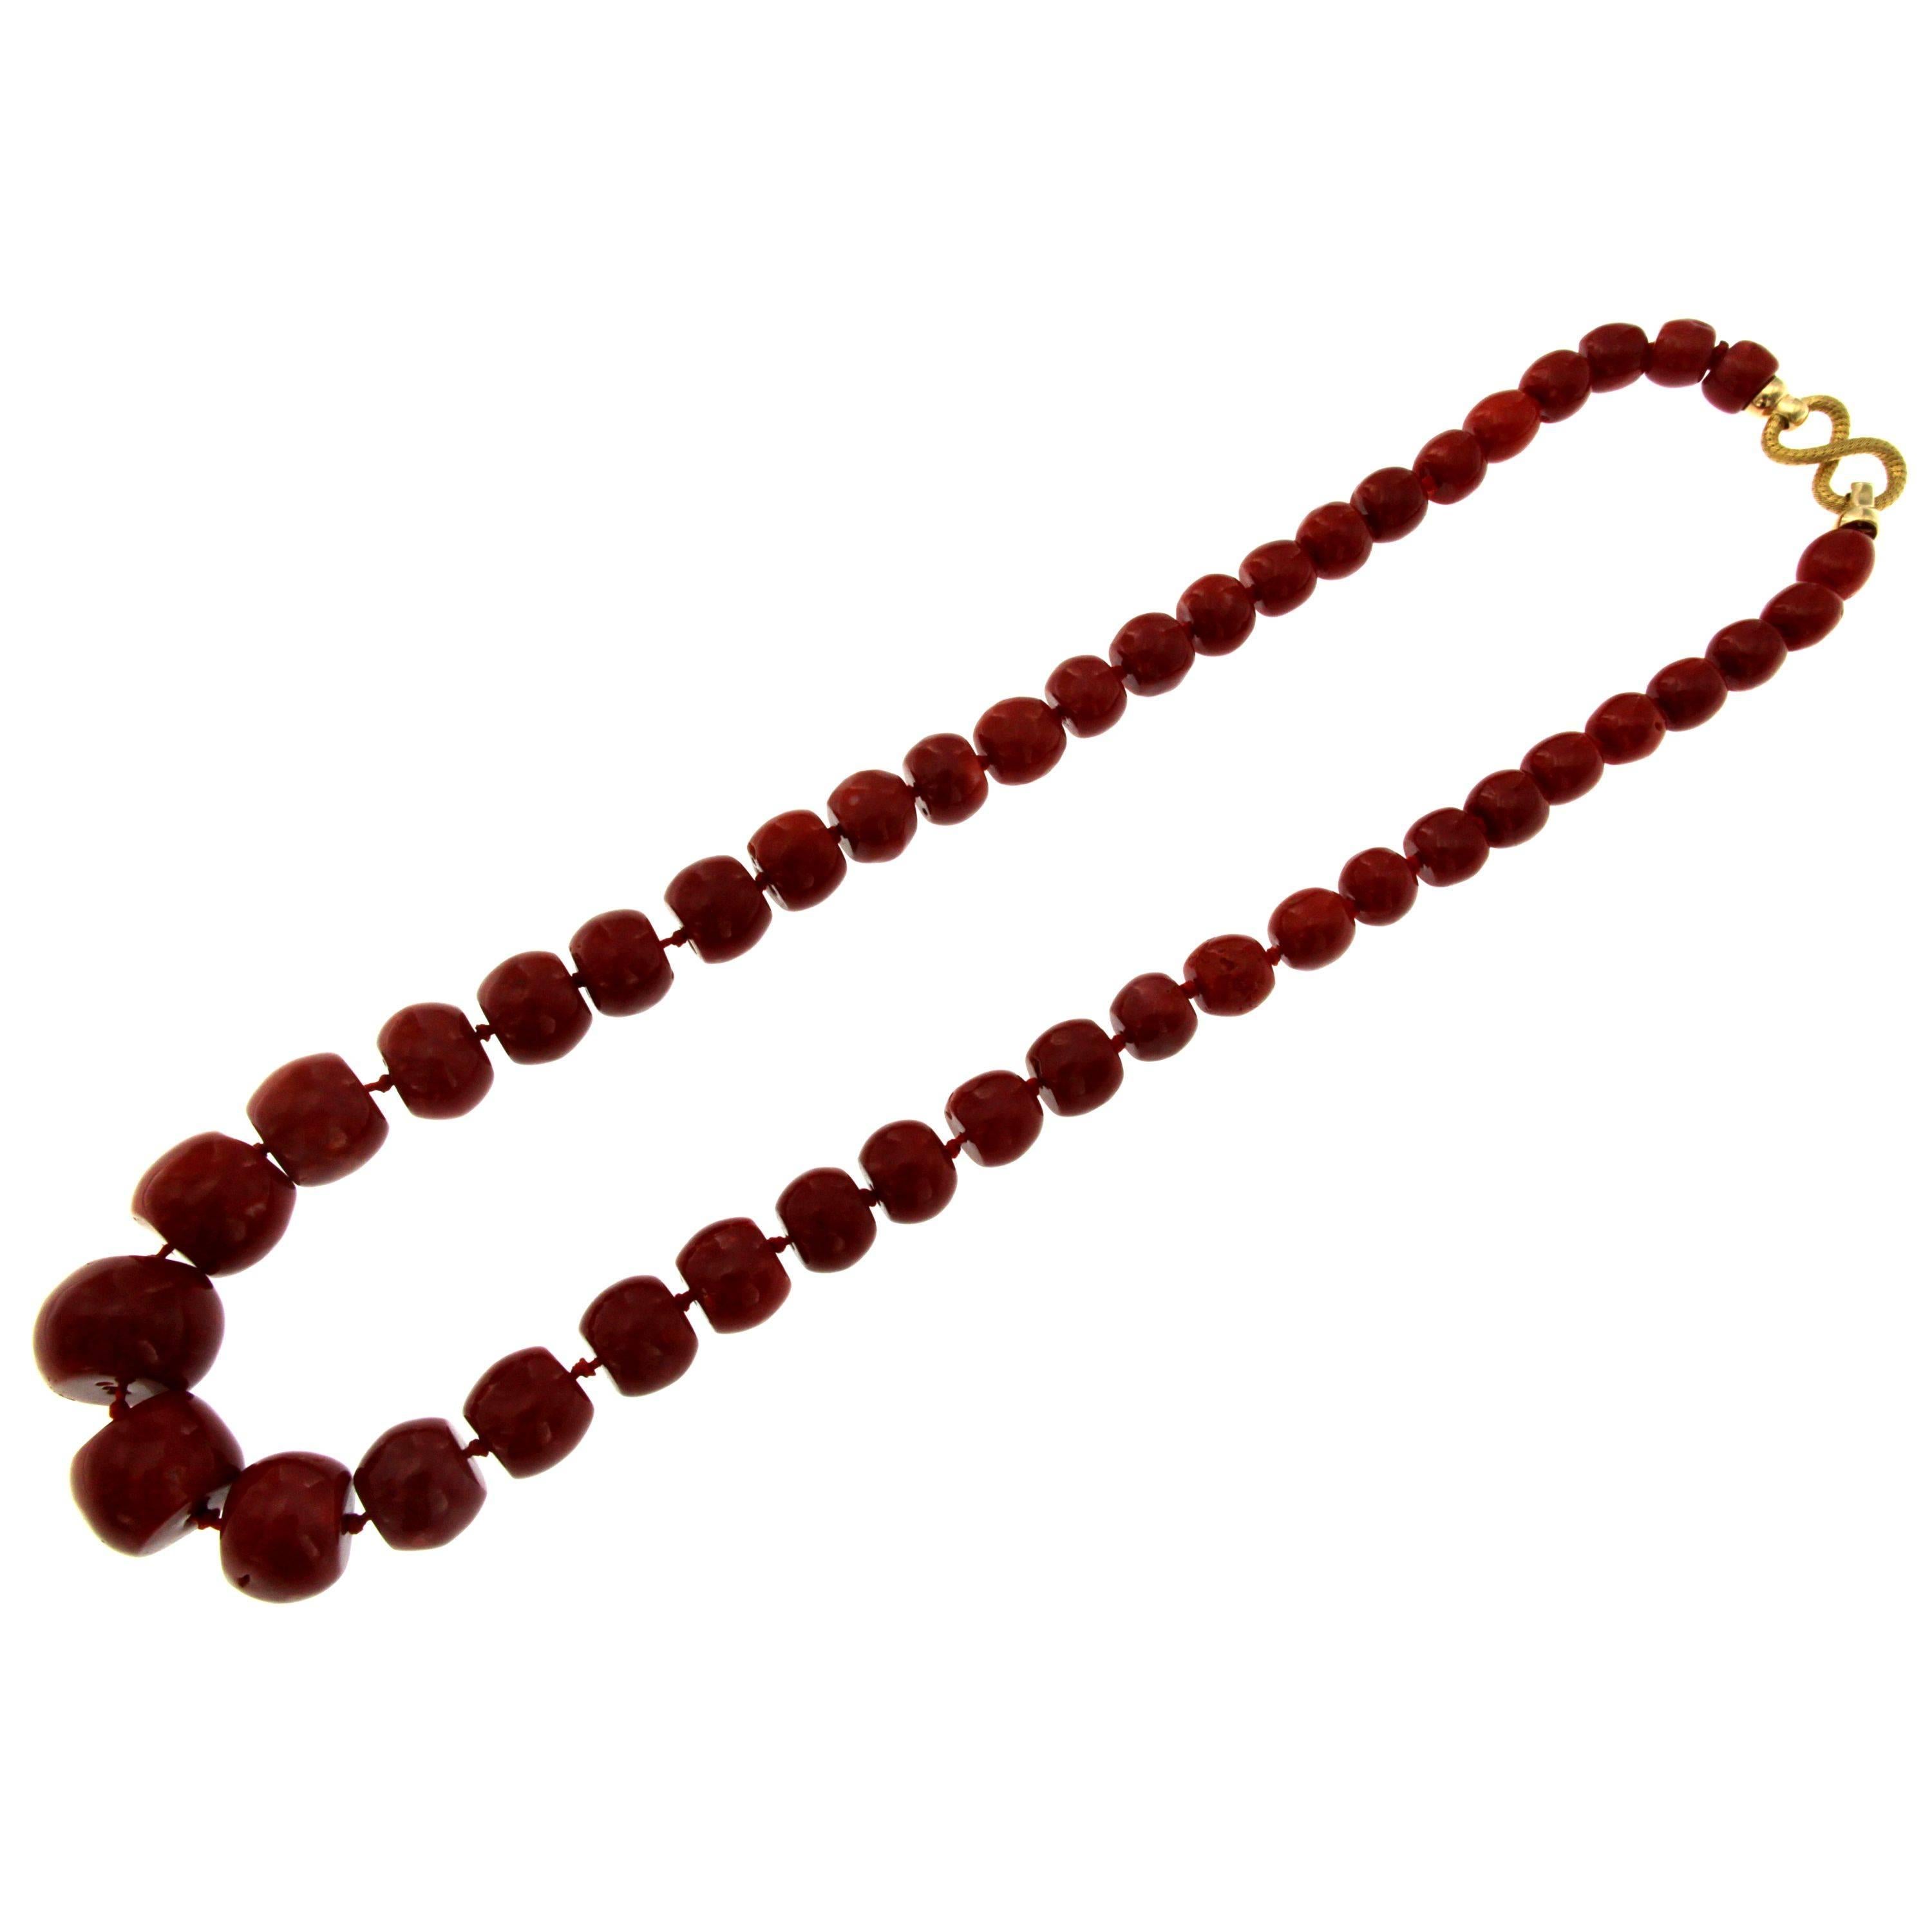 A truly Rare necklace strand of fine Aka Japanese red intensive coral beads. Circa 1960 
The coral is one of the greatest variety, 100% natural not dyed or worked with any resin or other synthetic materials free from any matural blemish